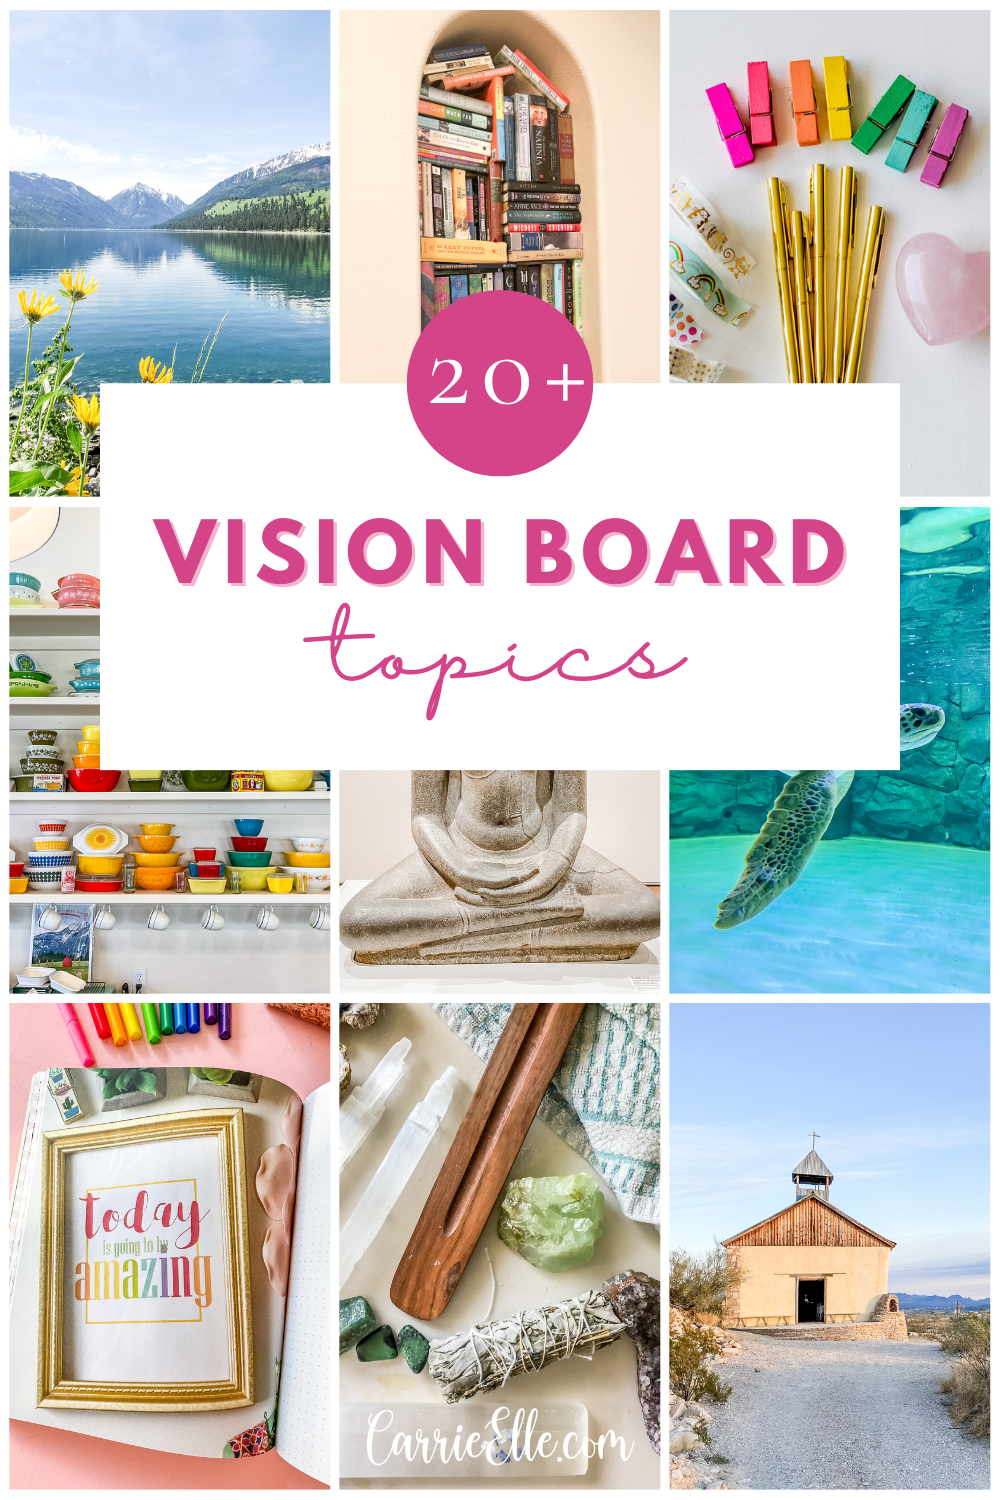 Vision Board Topics to Get You Started - Carrie Elle